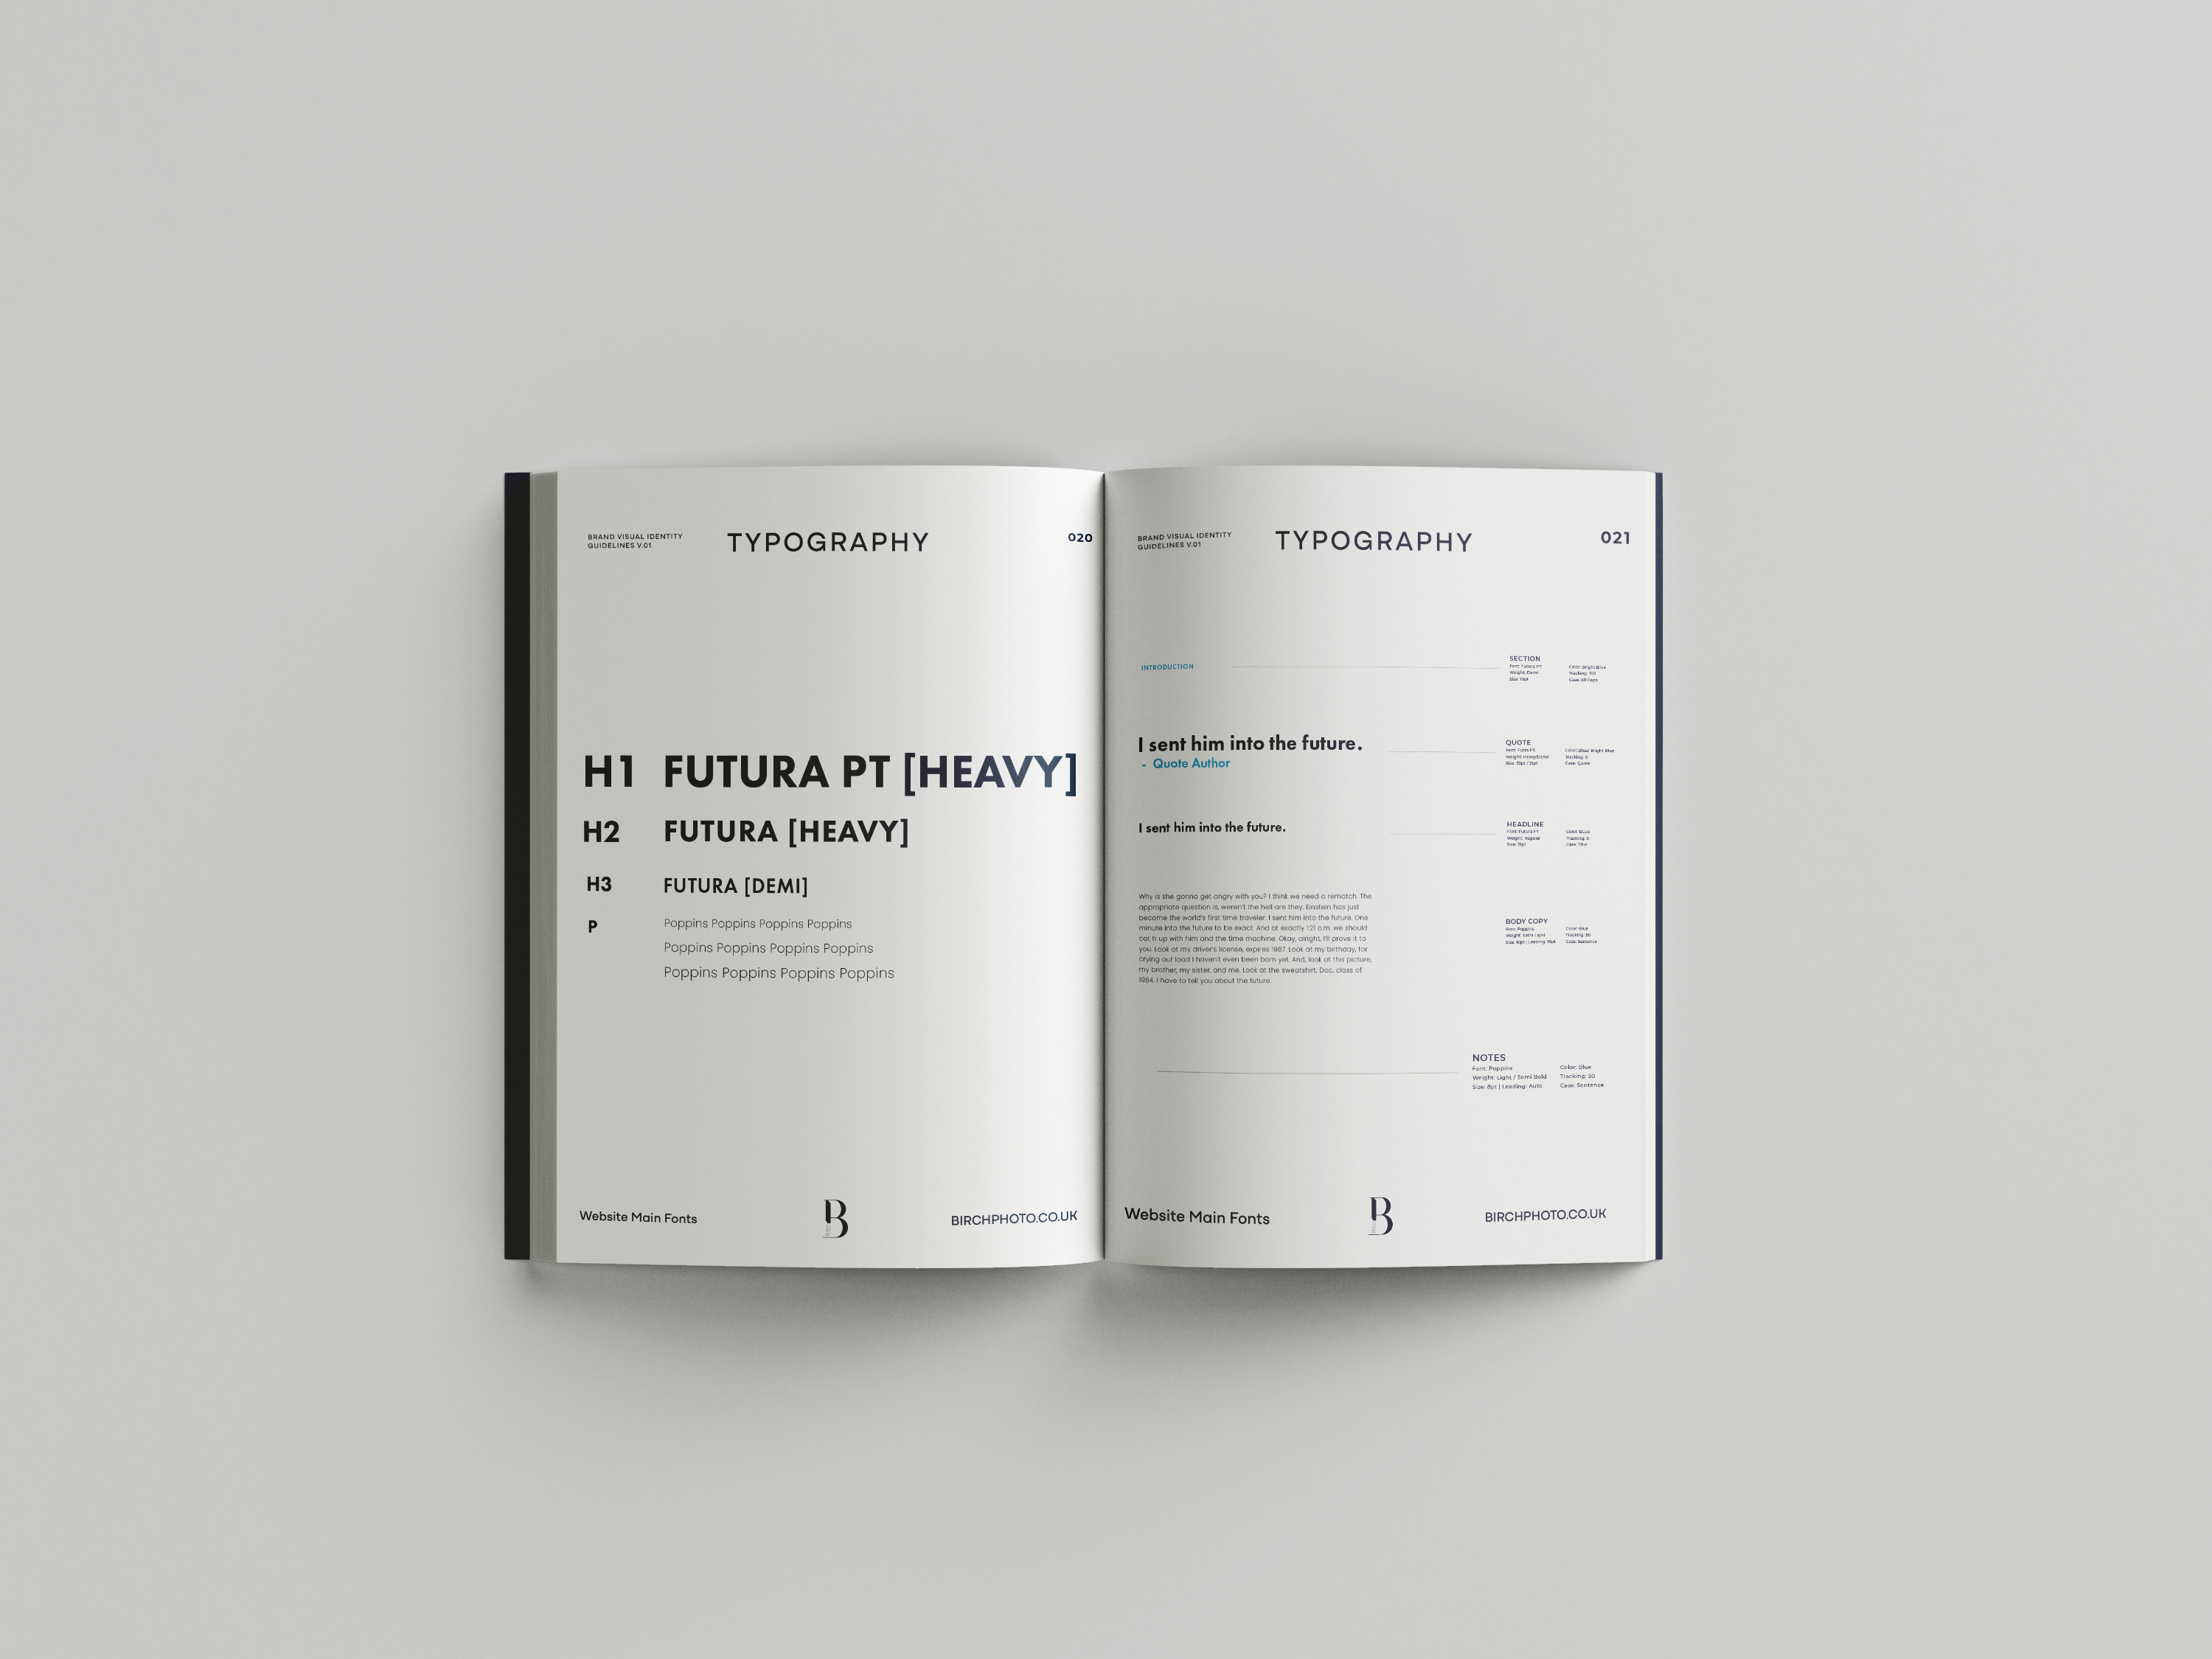 The brand guidelines open on the pages for 'Typography' guides.